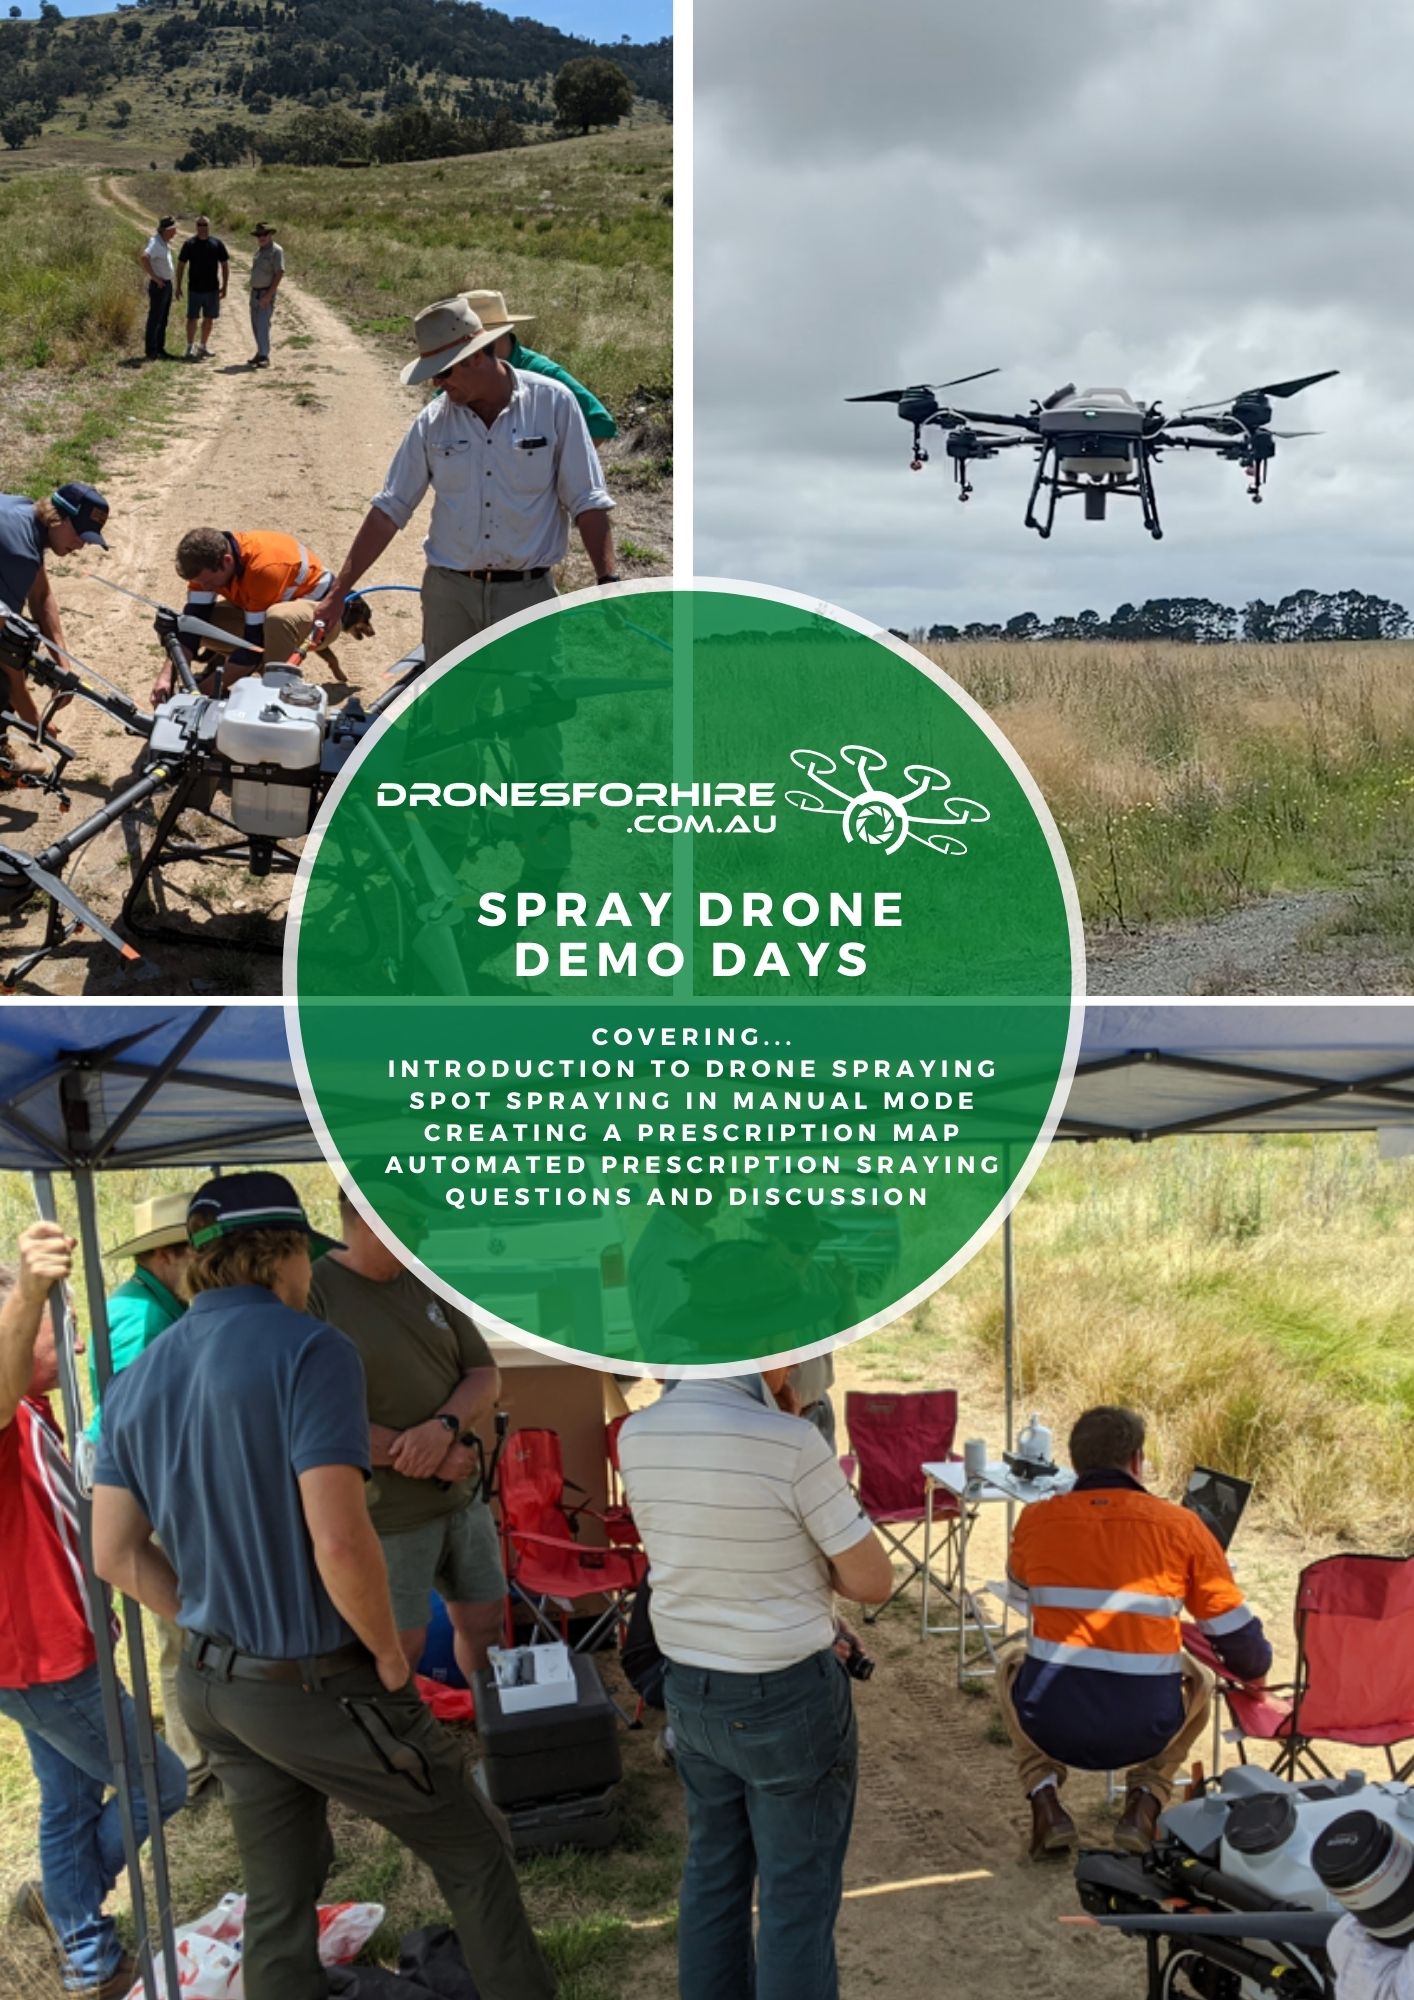 View upcoming spray drone demo day dates and locations